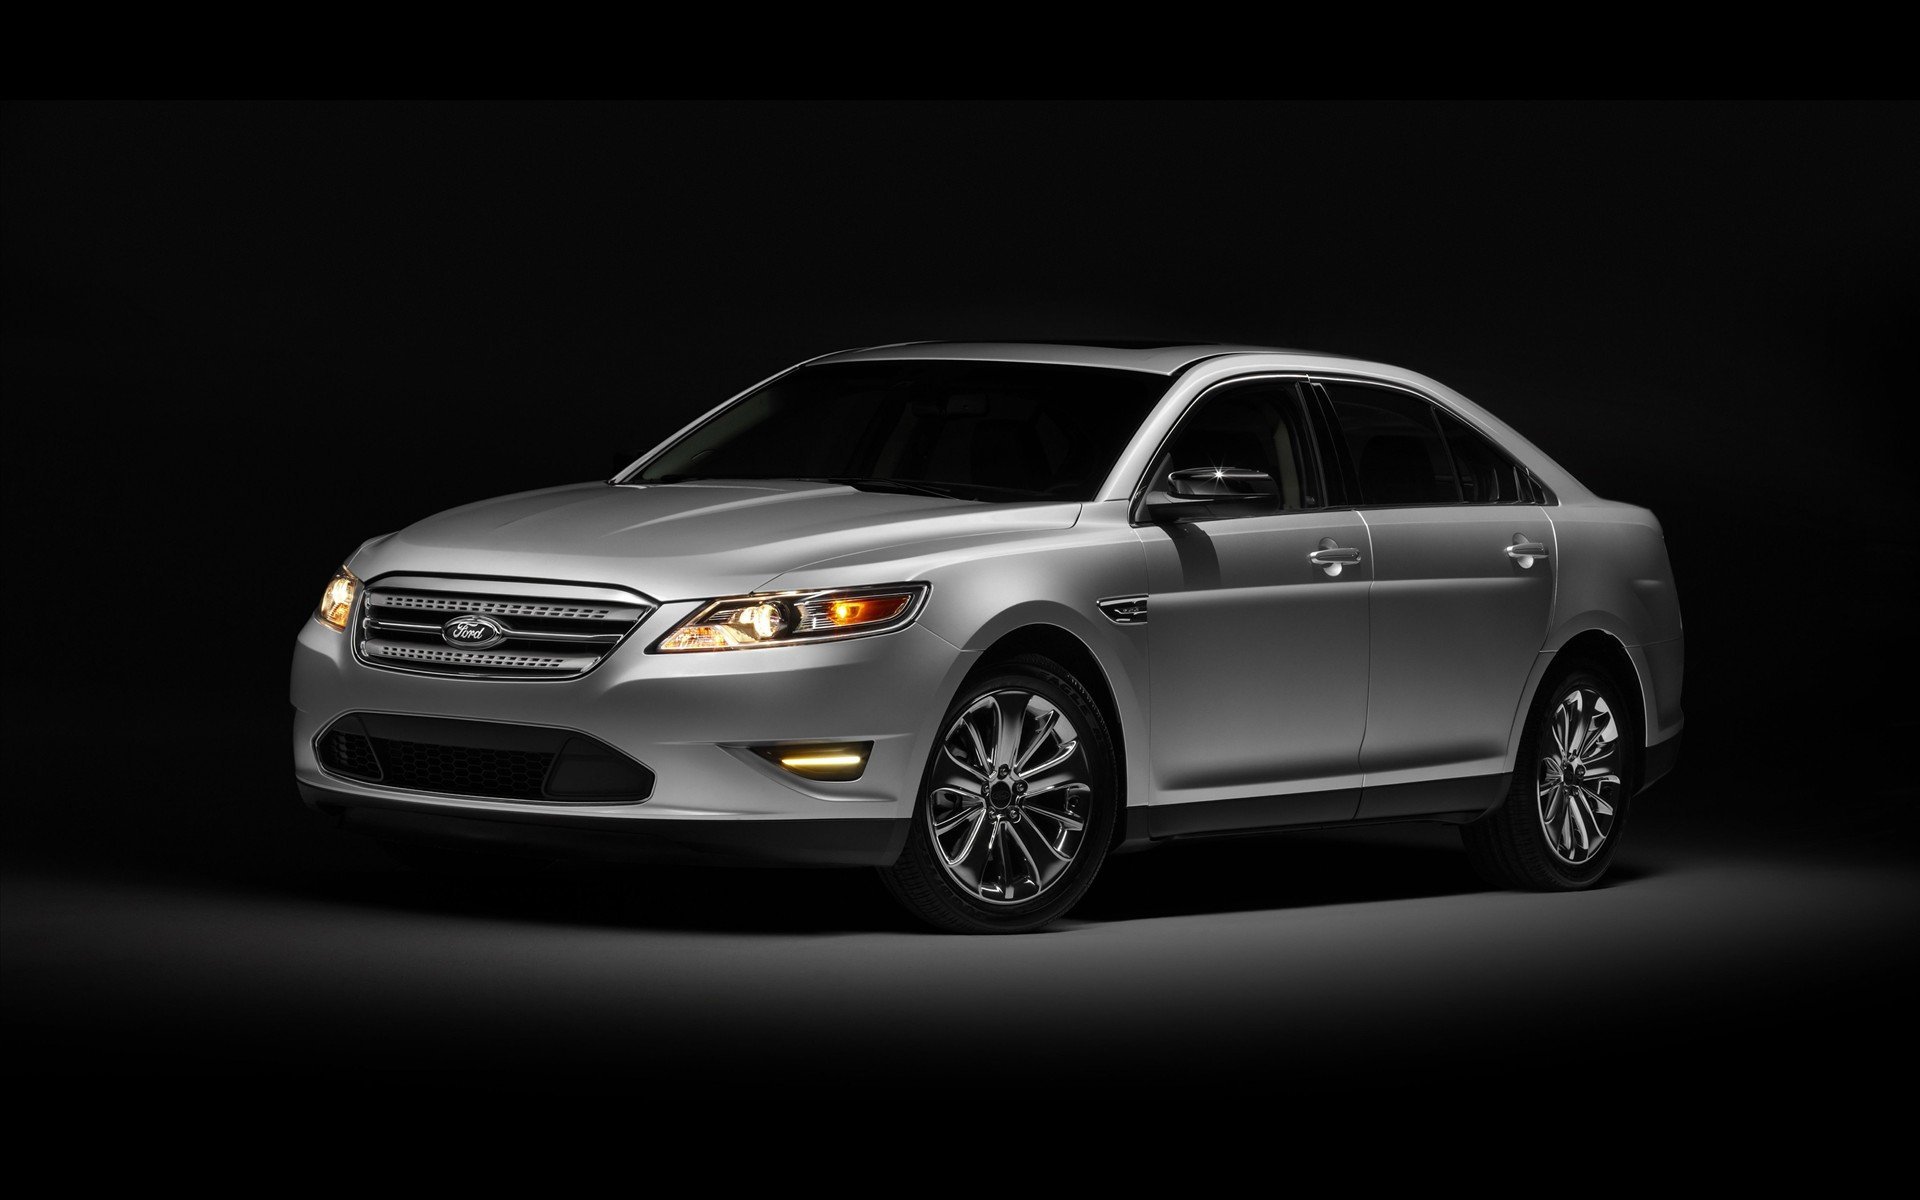 Best Ford Taurus wallpaper ID:101125 for High Resolution hd 1920x1200 computer